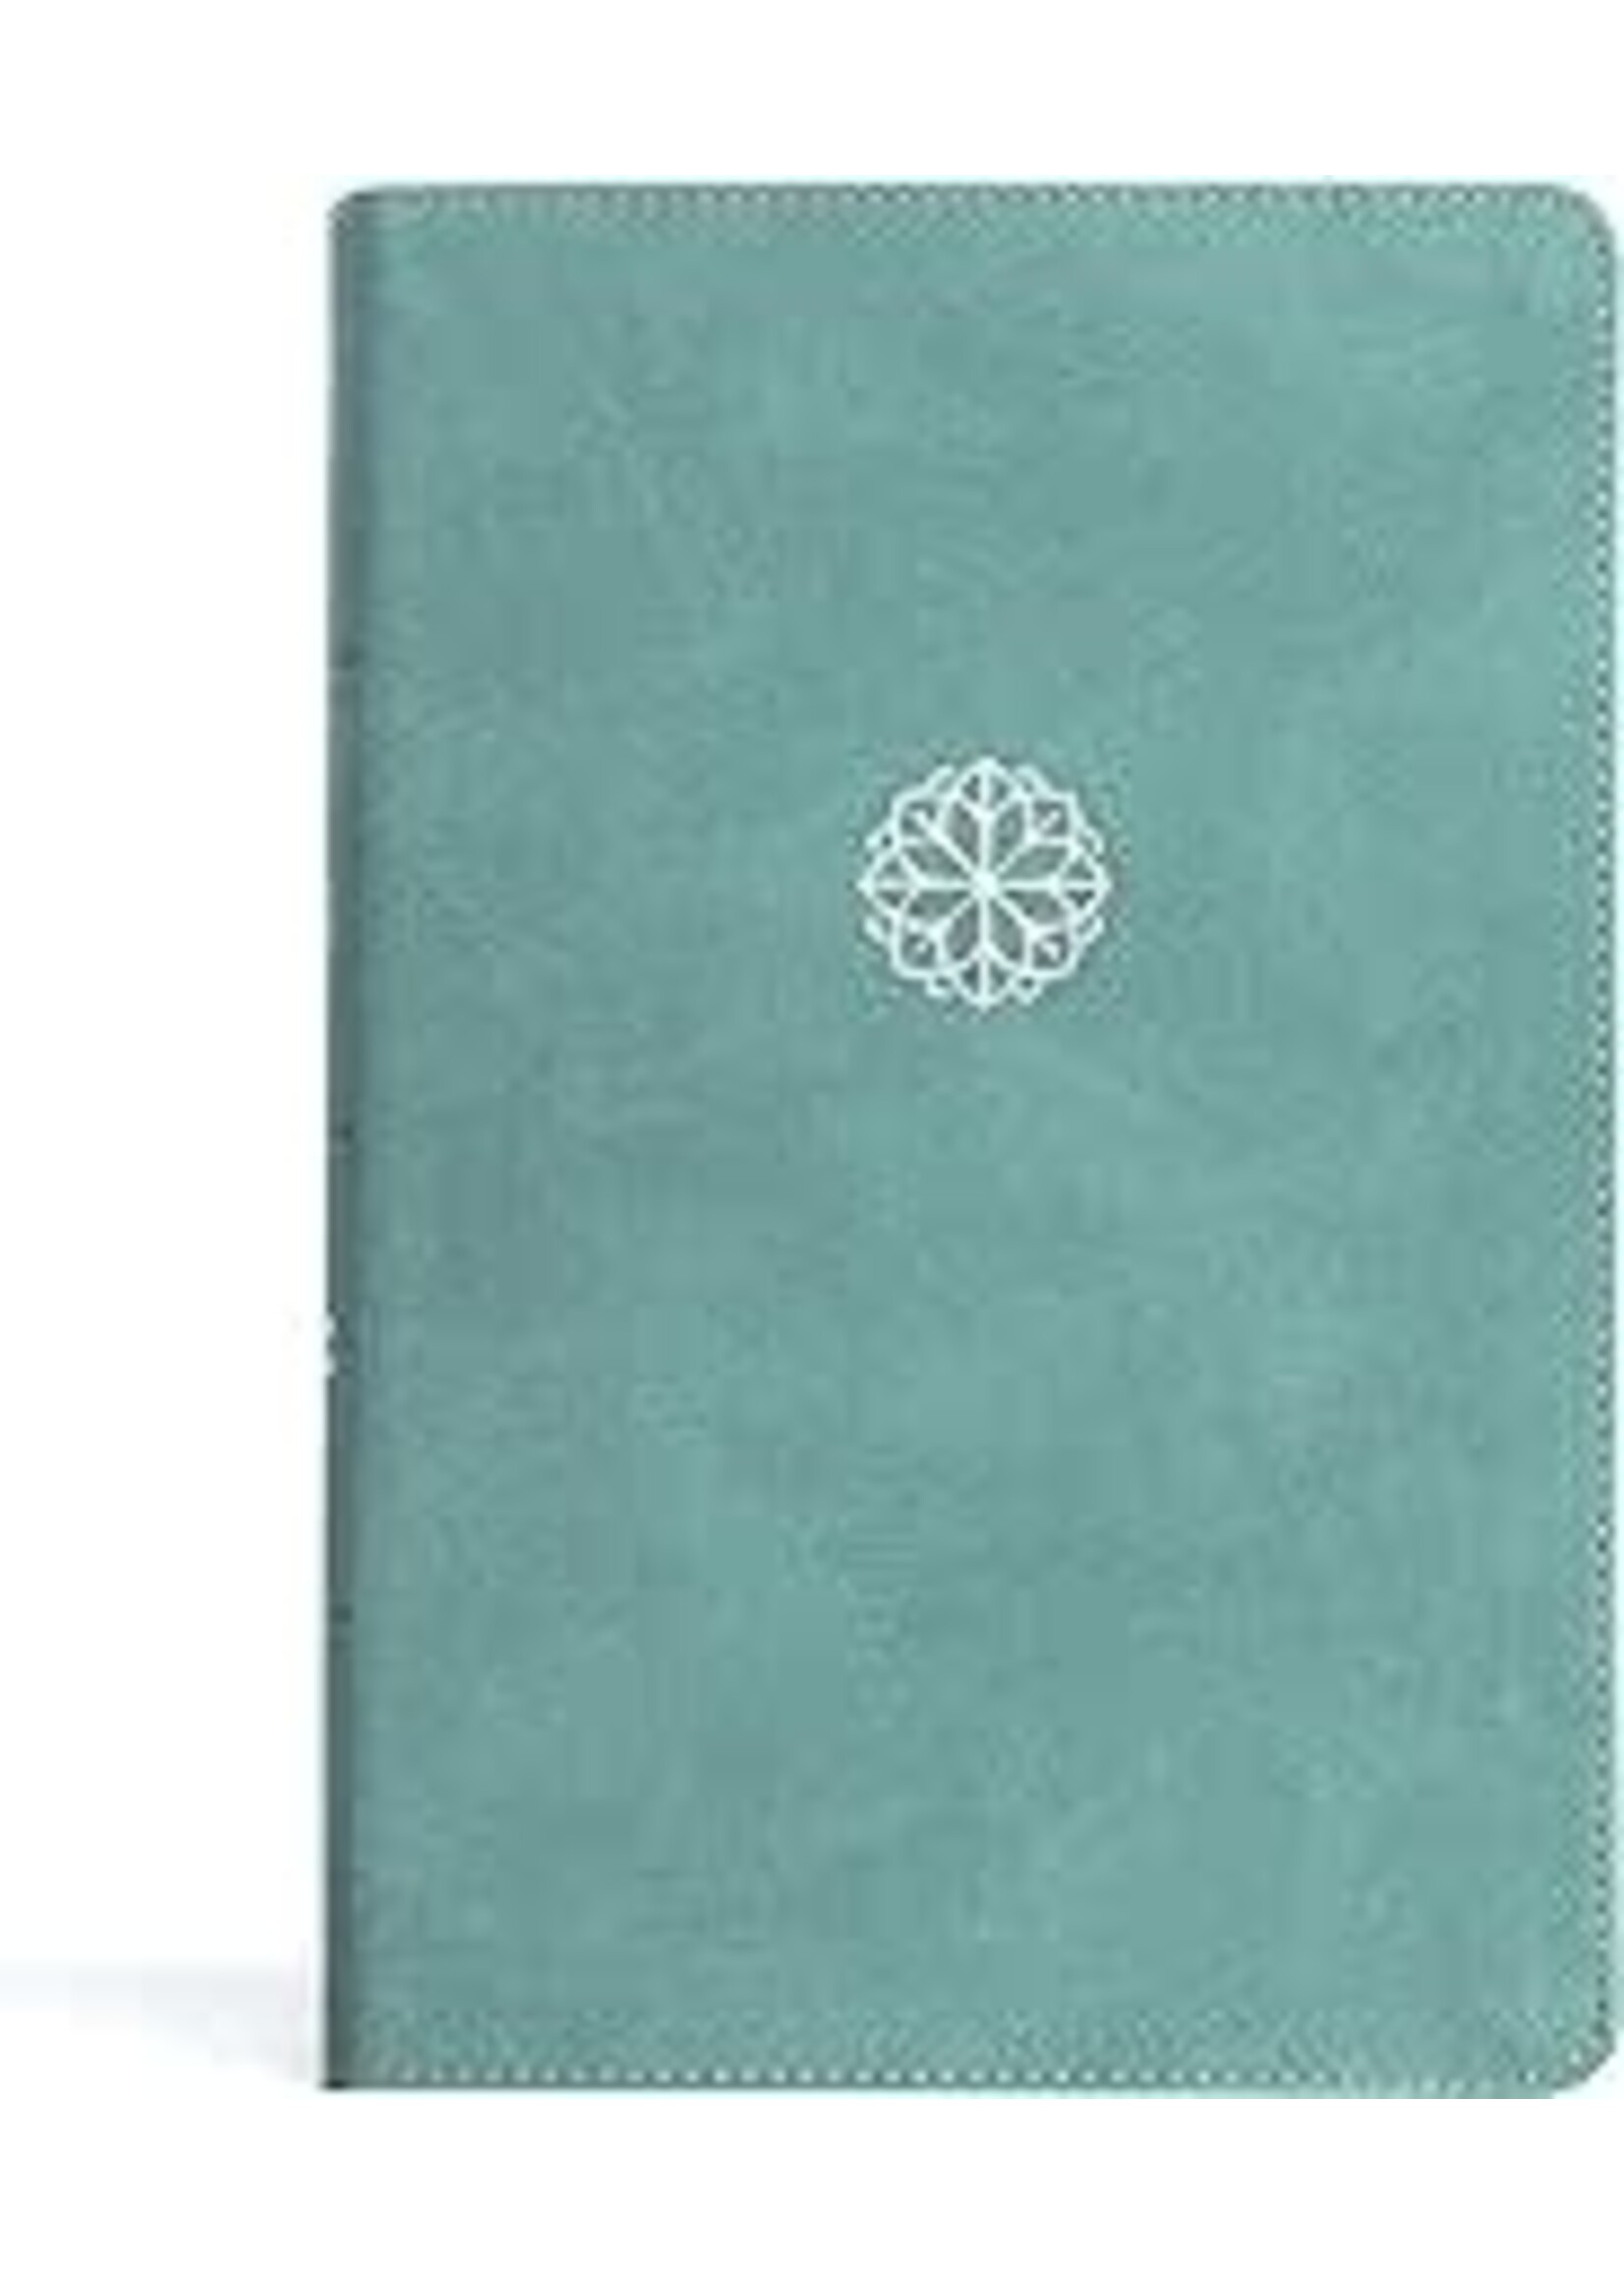 CSB Personal Size Giant Print Bible-Earthen Teal LeatherTouch